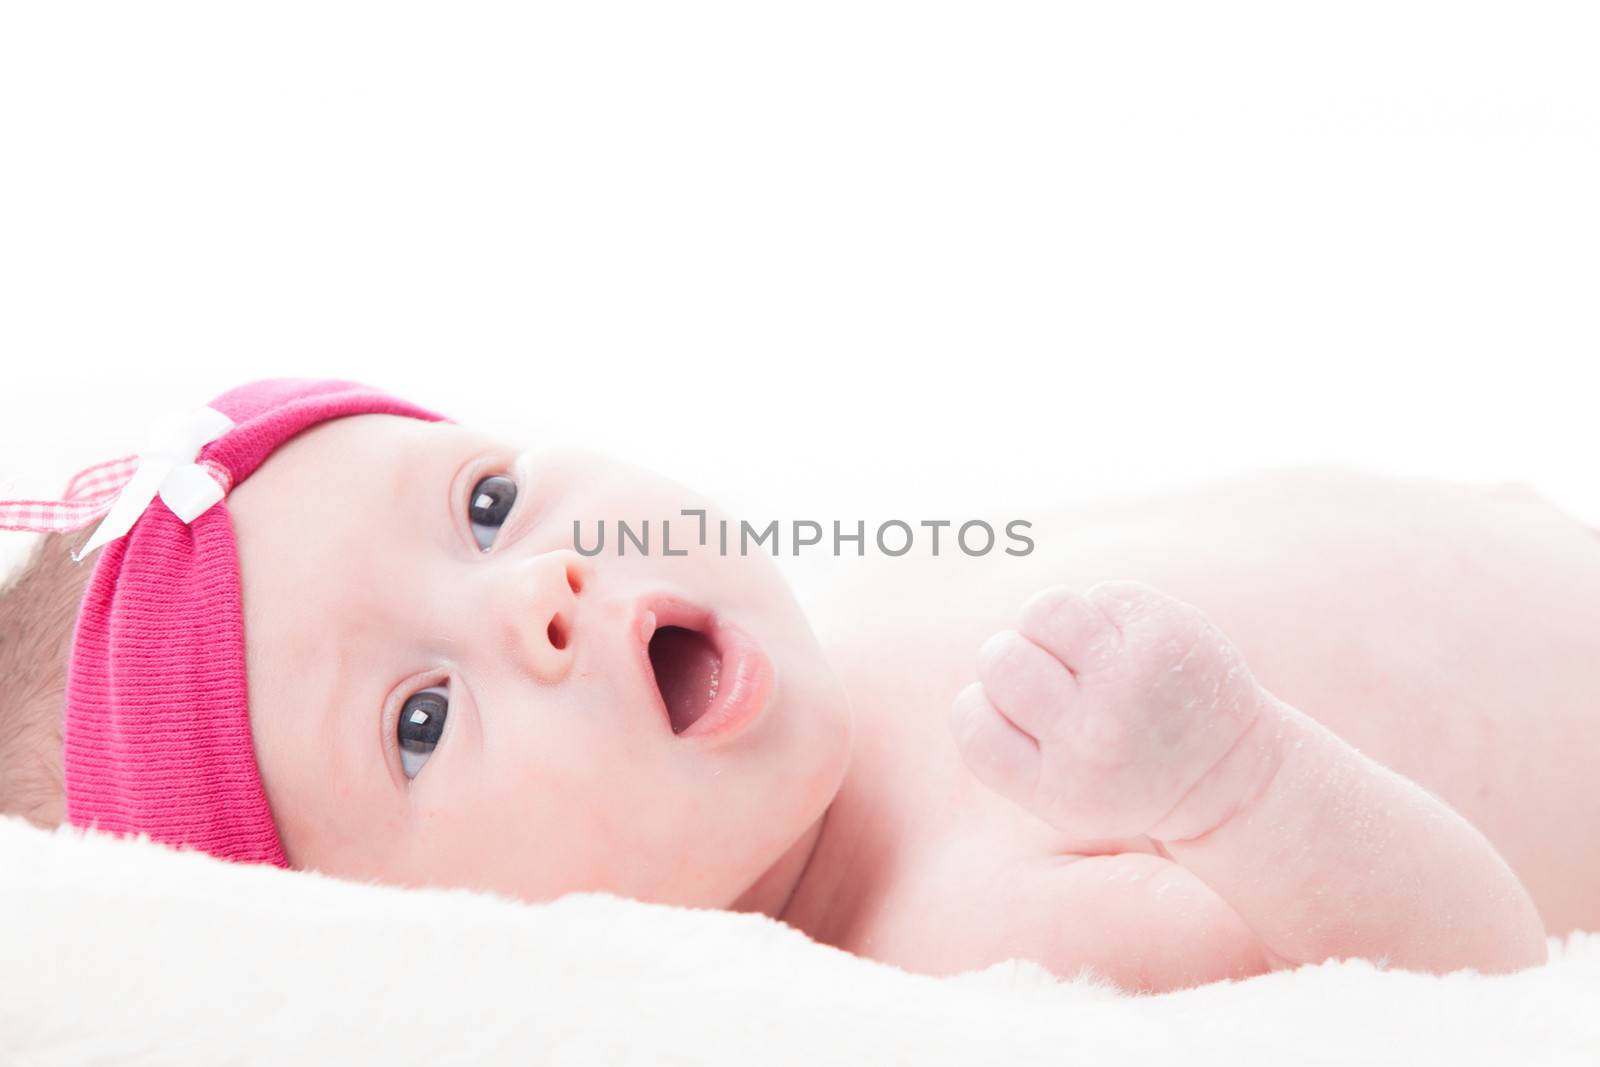 happy newborn baby girl just a week old photographed in the studio